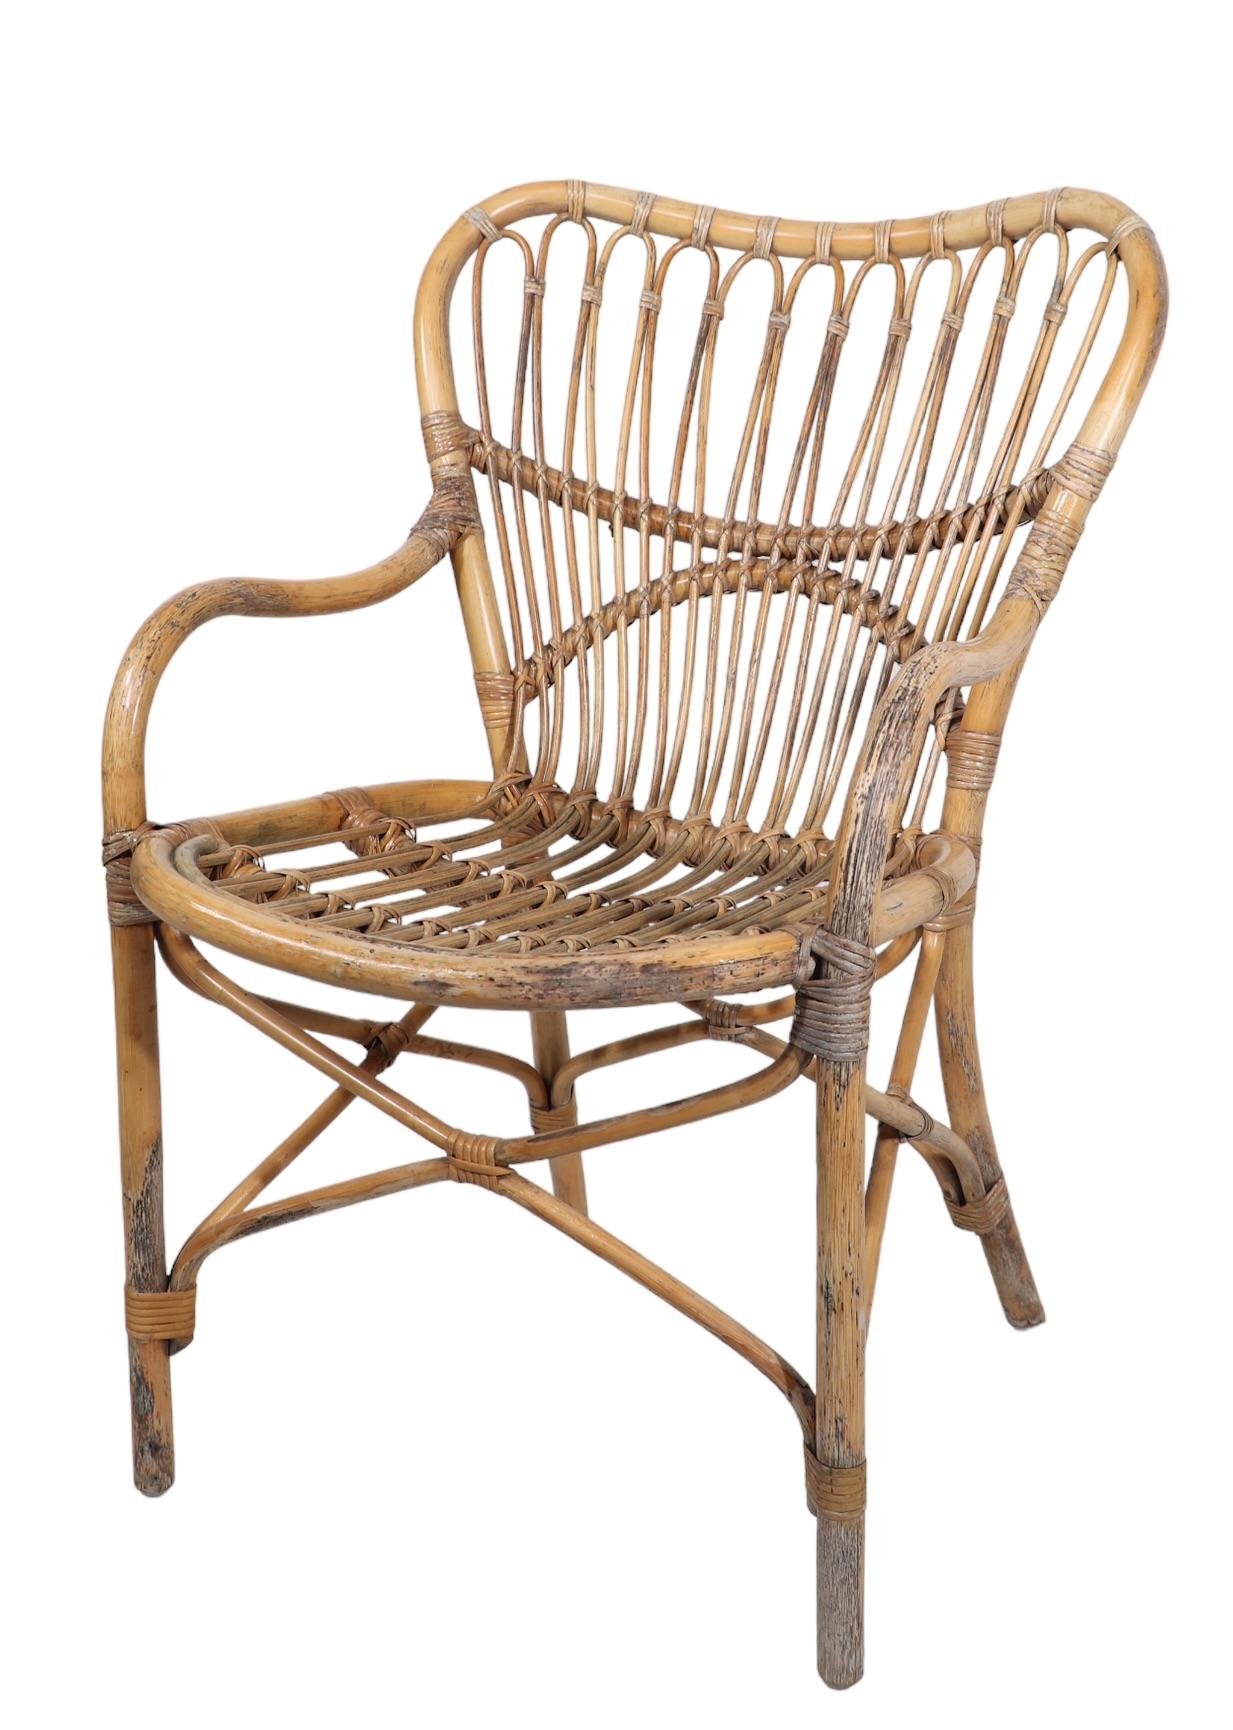 Chic, stylish, sophisticated bamboo, and rattan side chair, made in Italy, circa 1950/1960's, in the style of Franco Albini, and Vittorio Bonaccina. This example is in good original condition, structurally sound and sturdy, the finish shows some